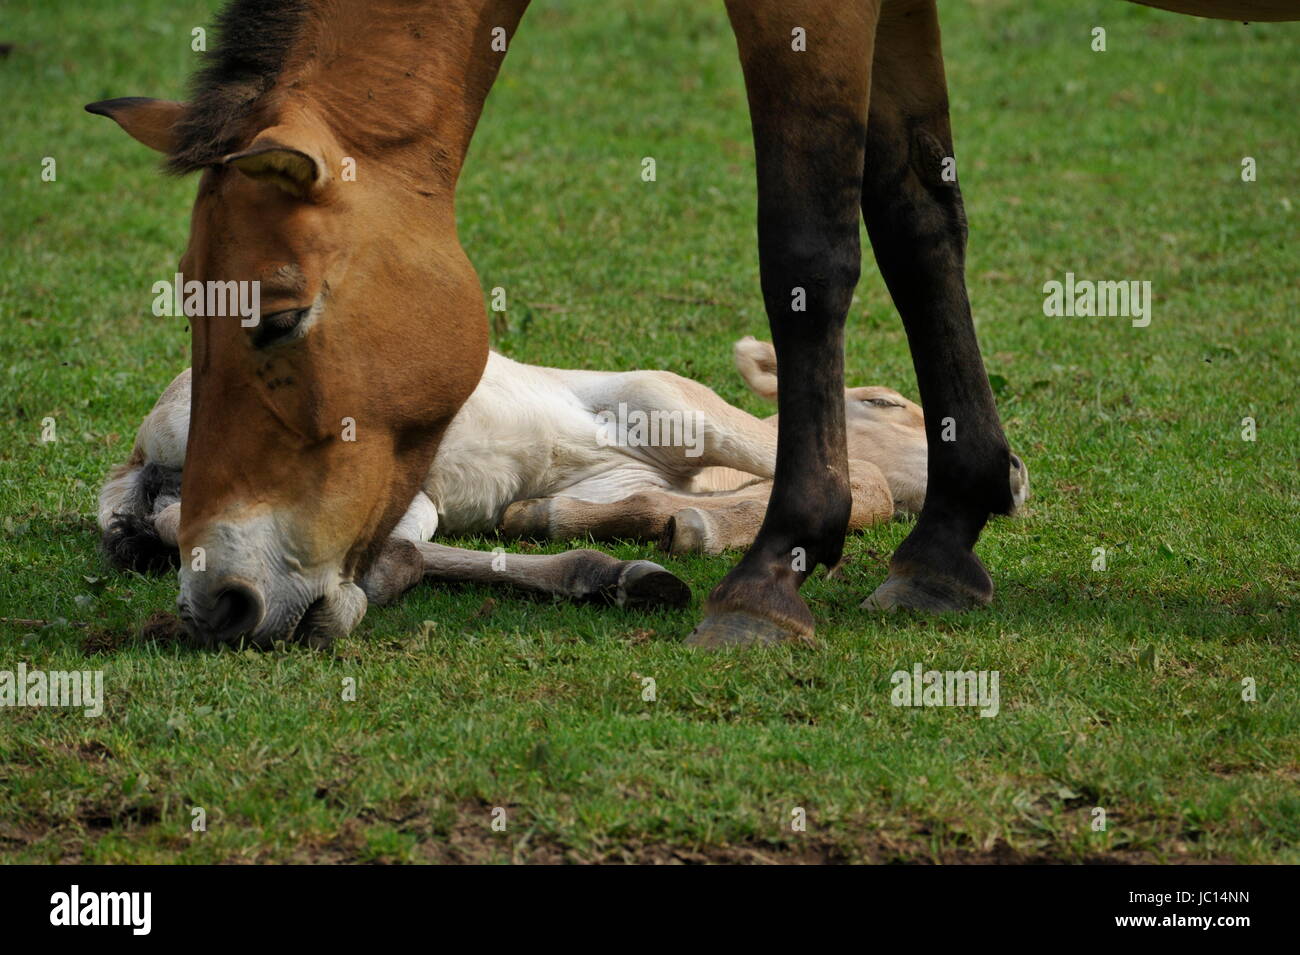 The Przewalski's horse with Foals Stock Photo